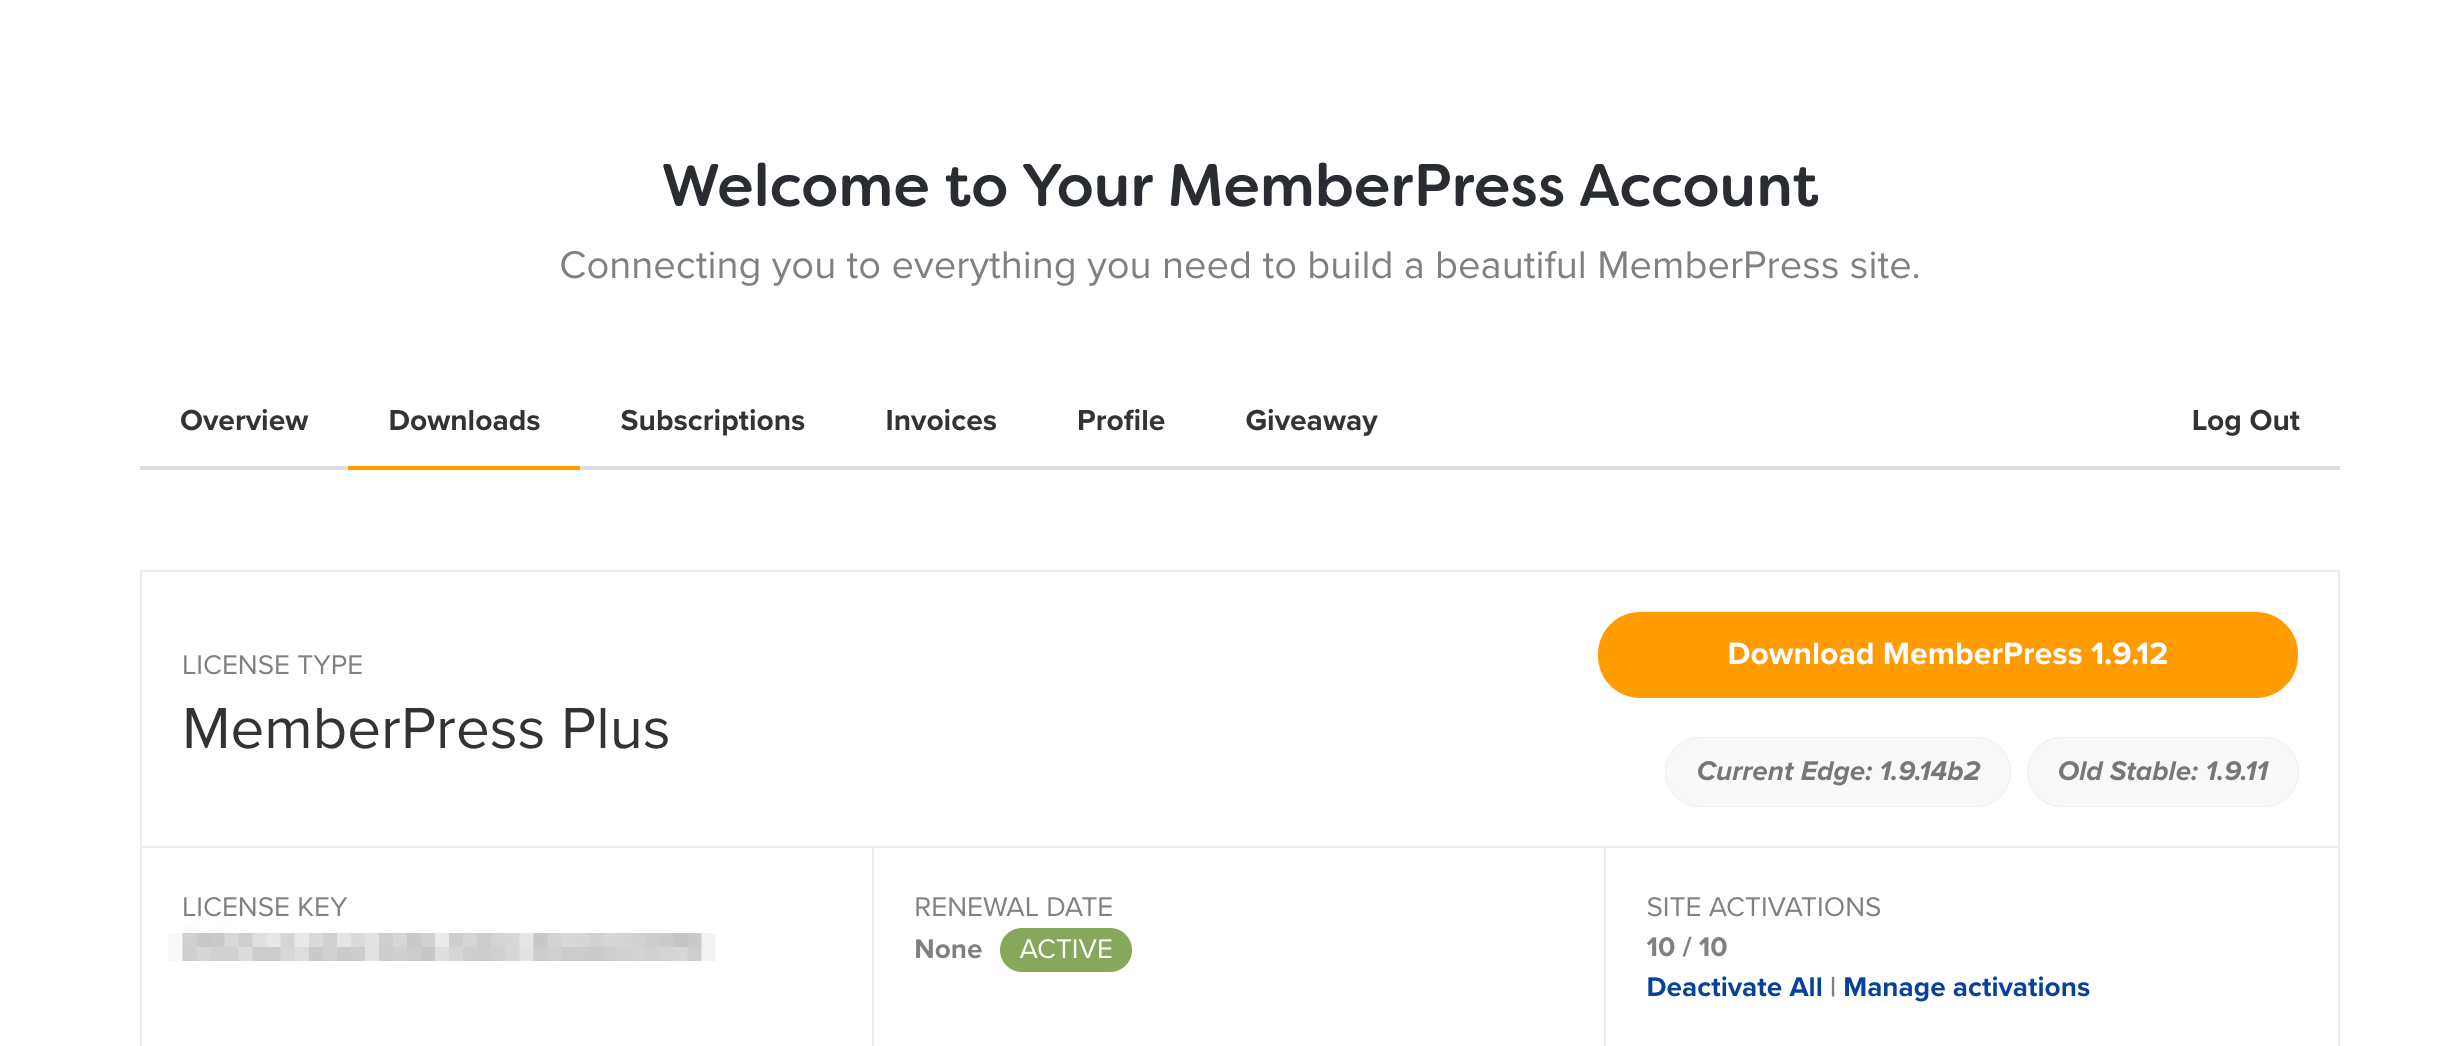 Downloading MemberPress from the Account page